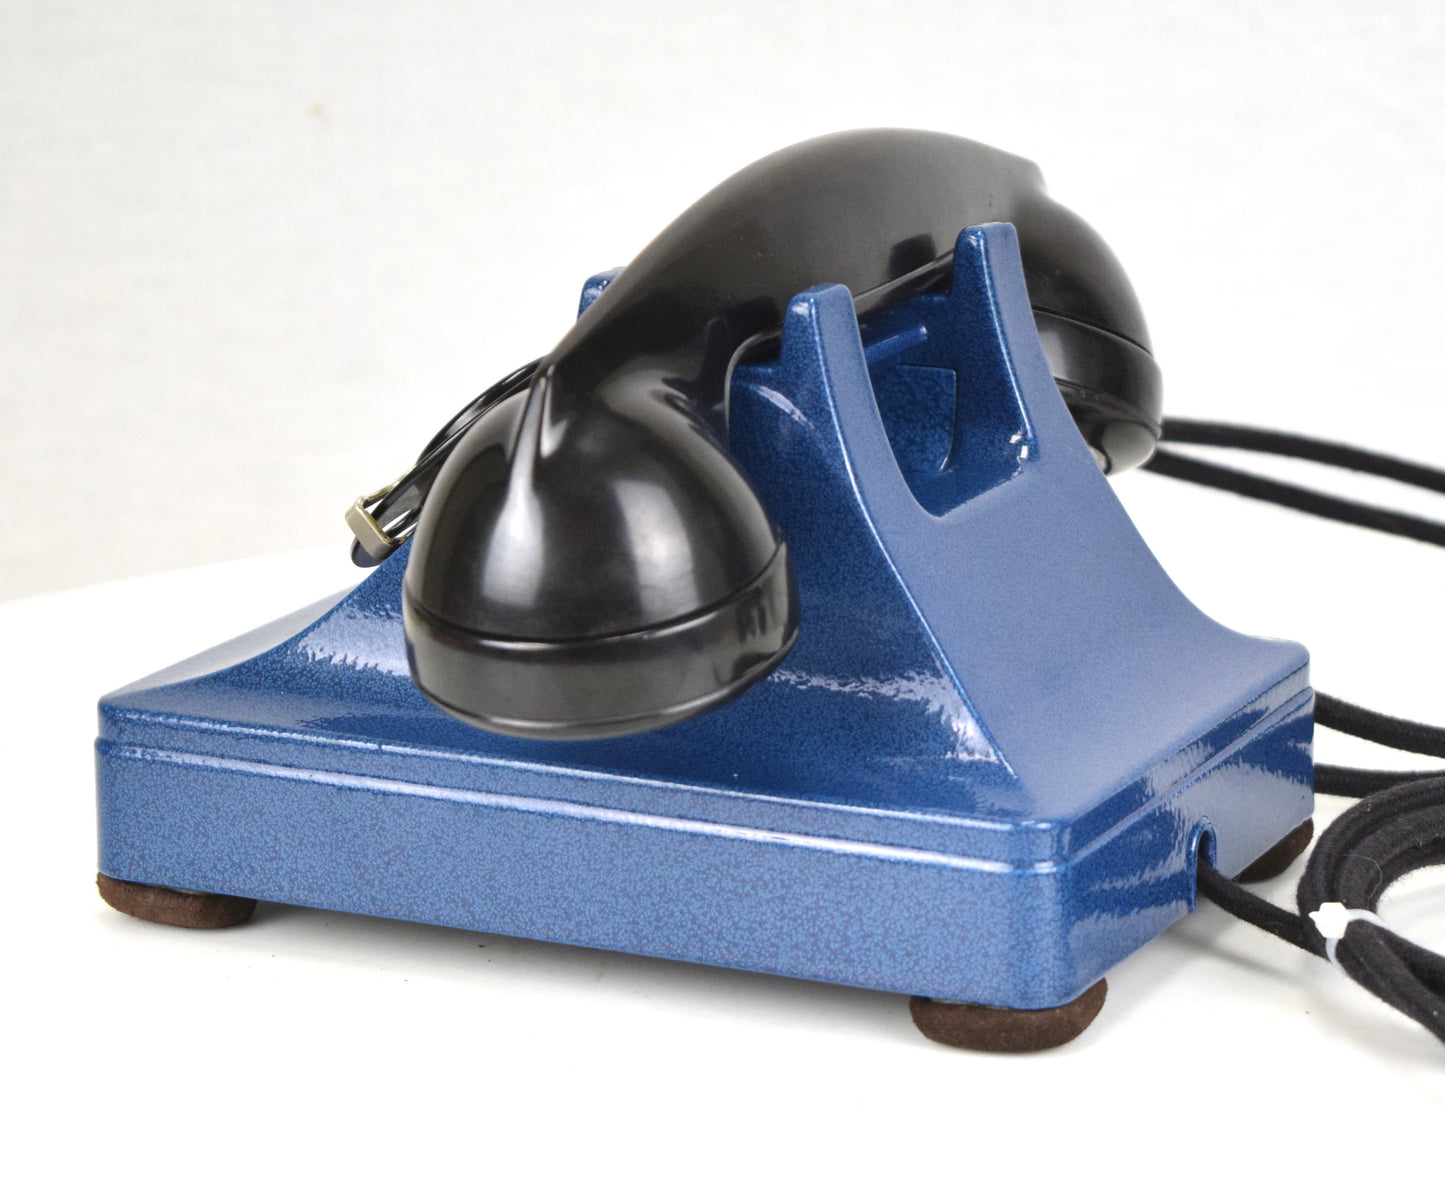 Western Electric 302 - Hammered Blue